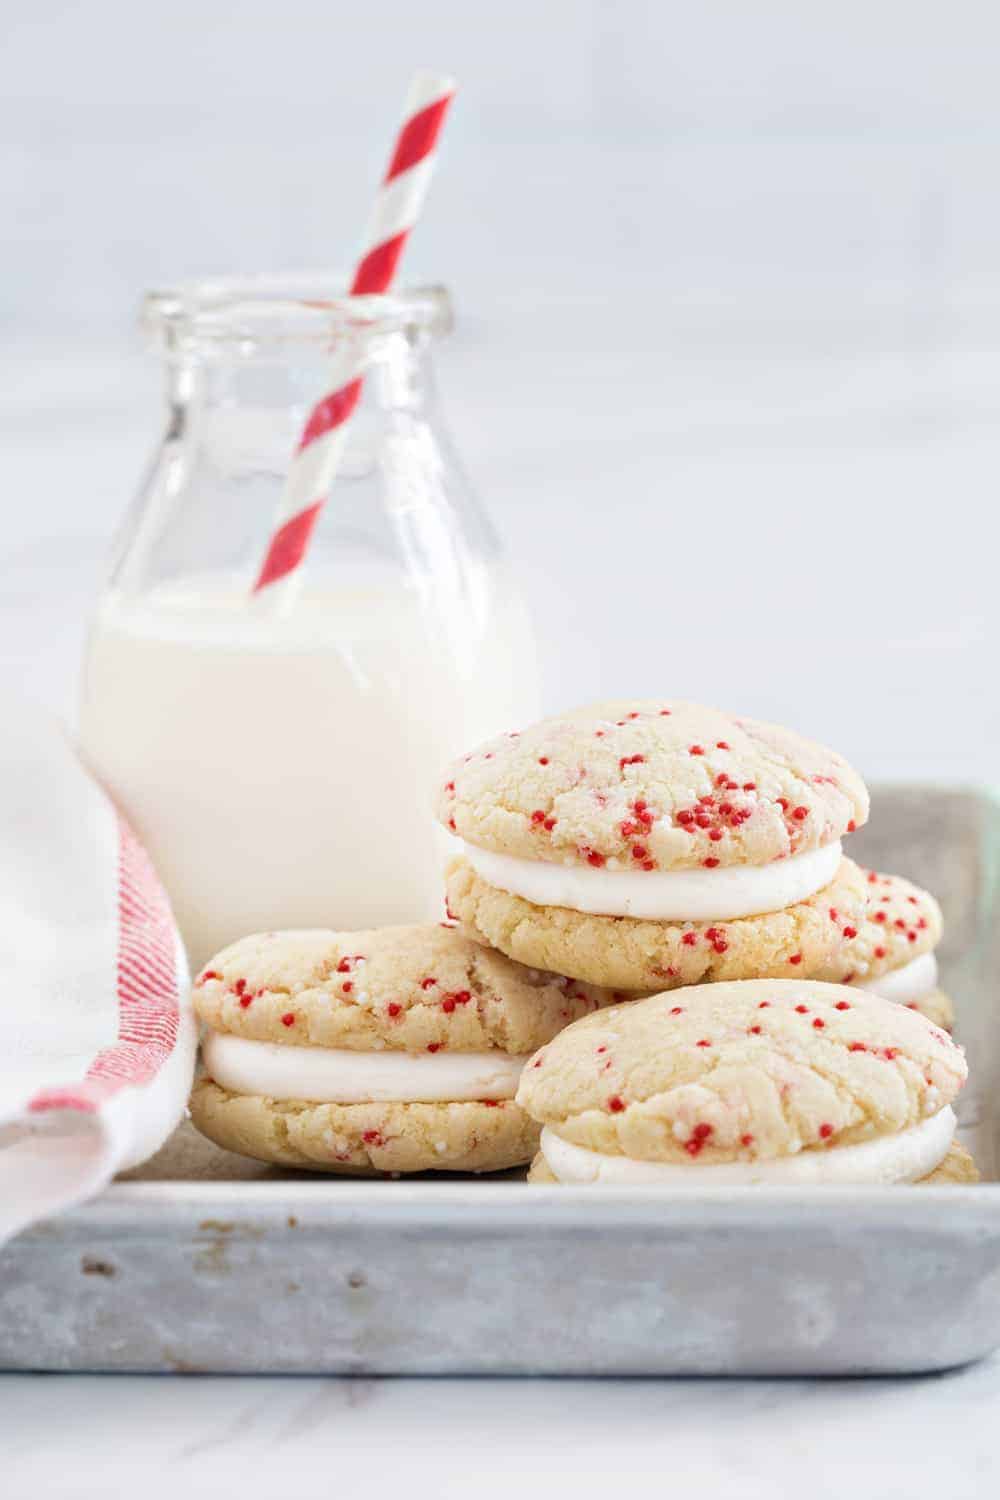 Easy Sugar Cookies come together in a snap! No chilling, rolling, or cookie cutters required!